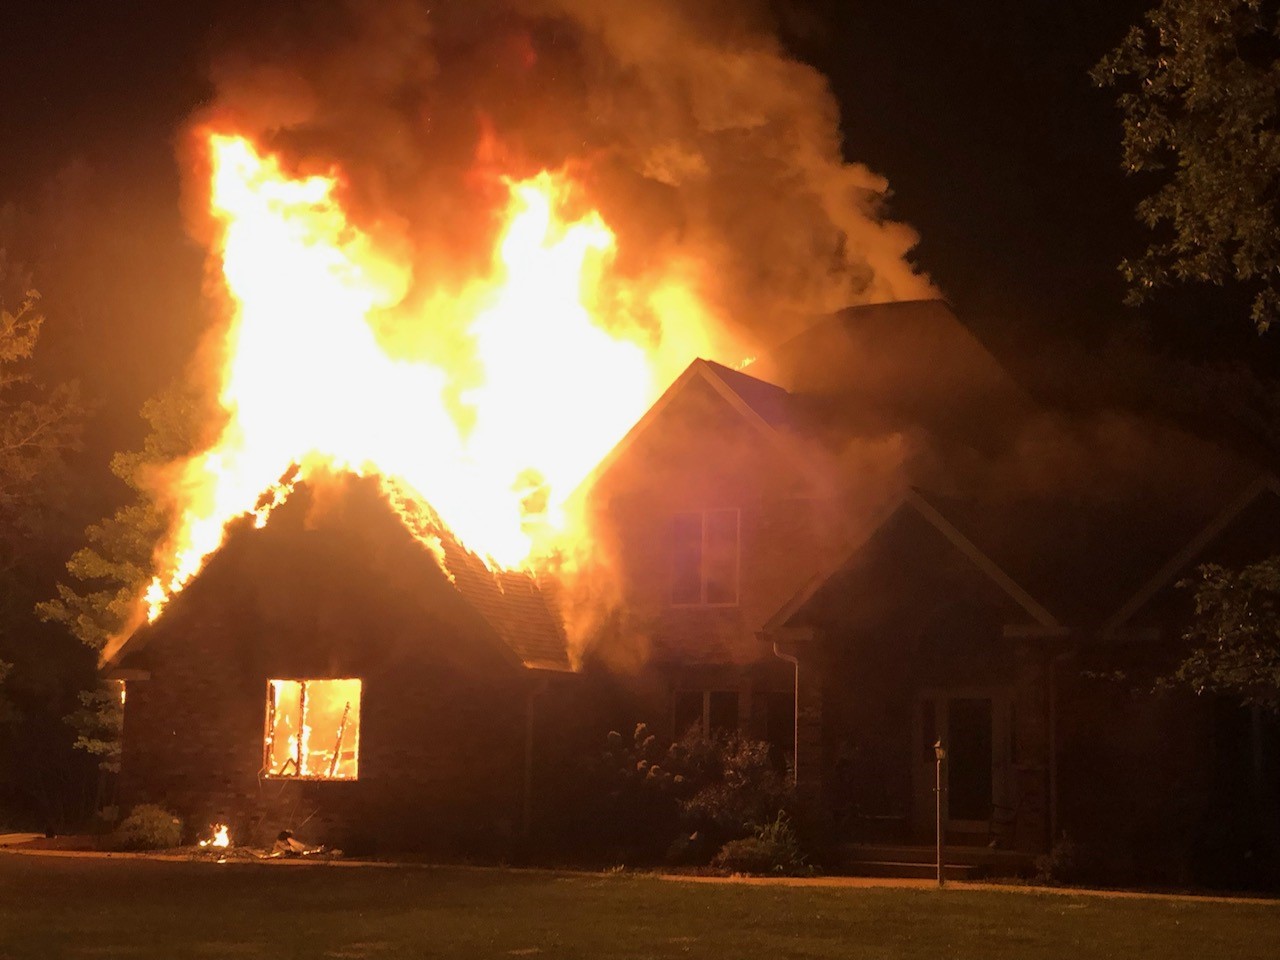 A house is seen engulfed in flames at nighttime. Orange flames can be seen inside the window and covering the roof.